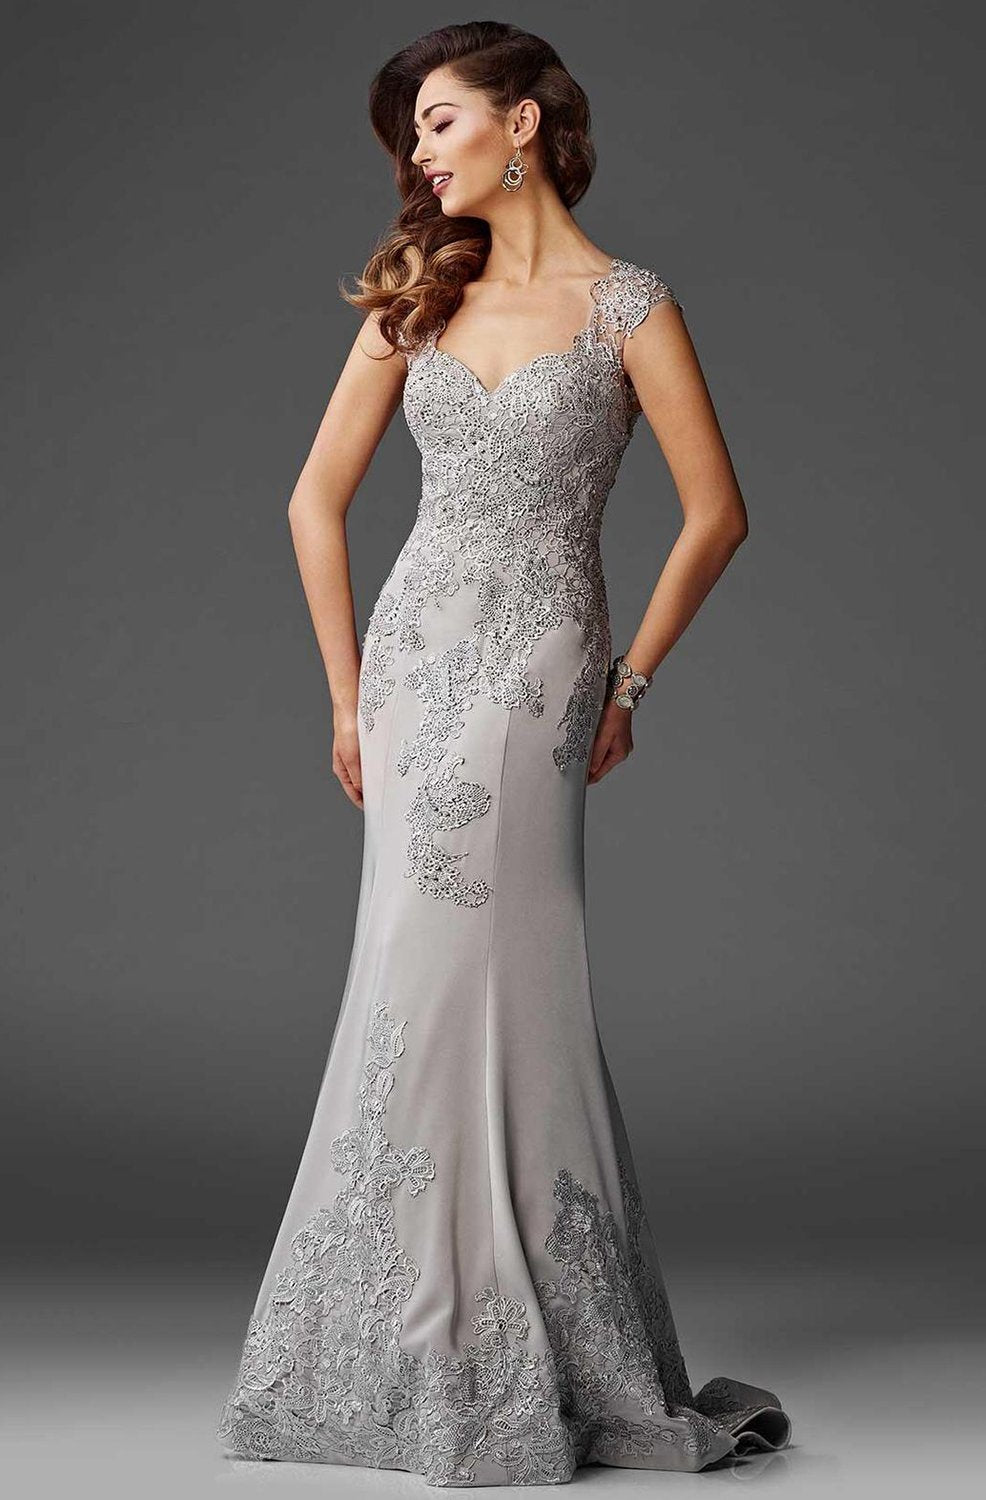 Clarisse - Sweetheart Lace Applique Evening Gown M6421 in Gray